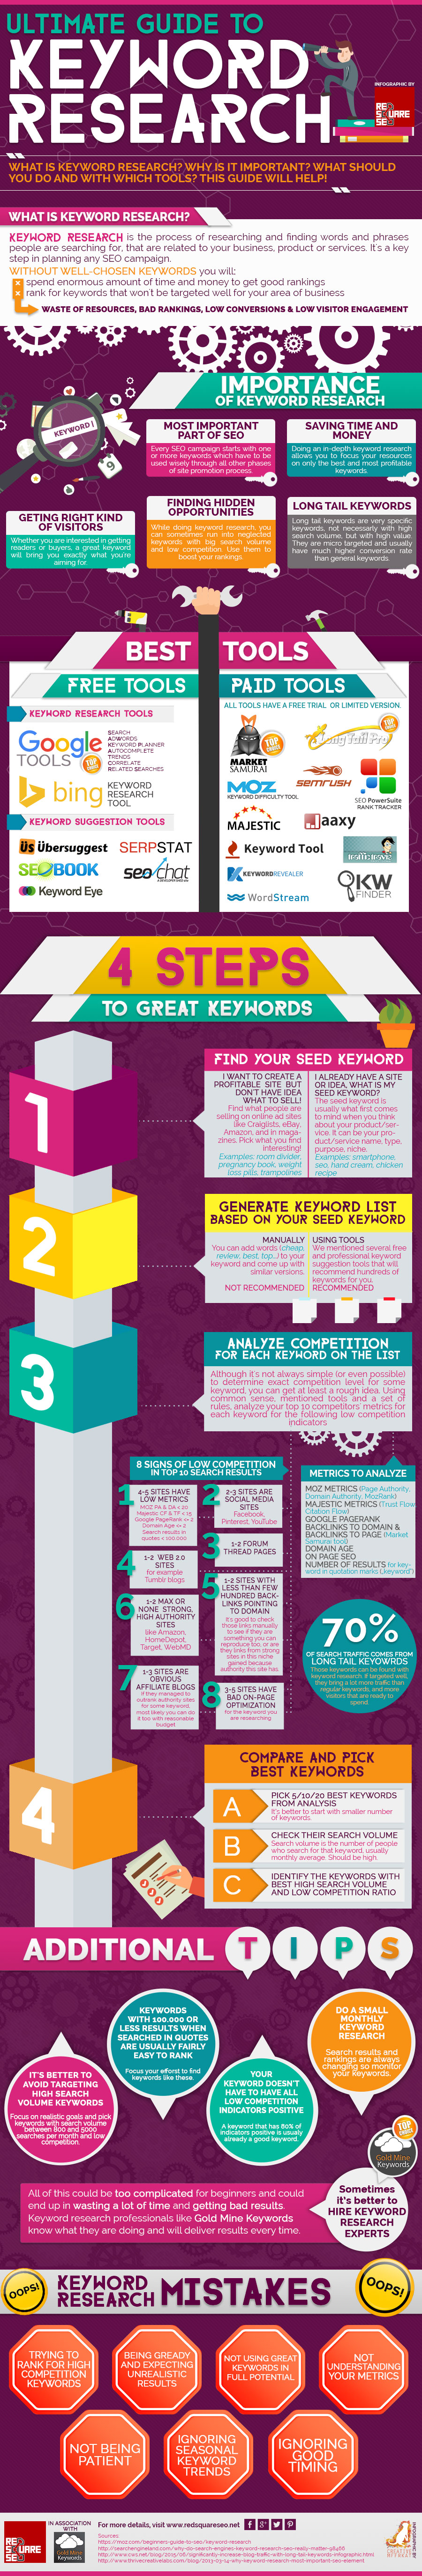 Guide to Keyword Research infographic